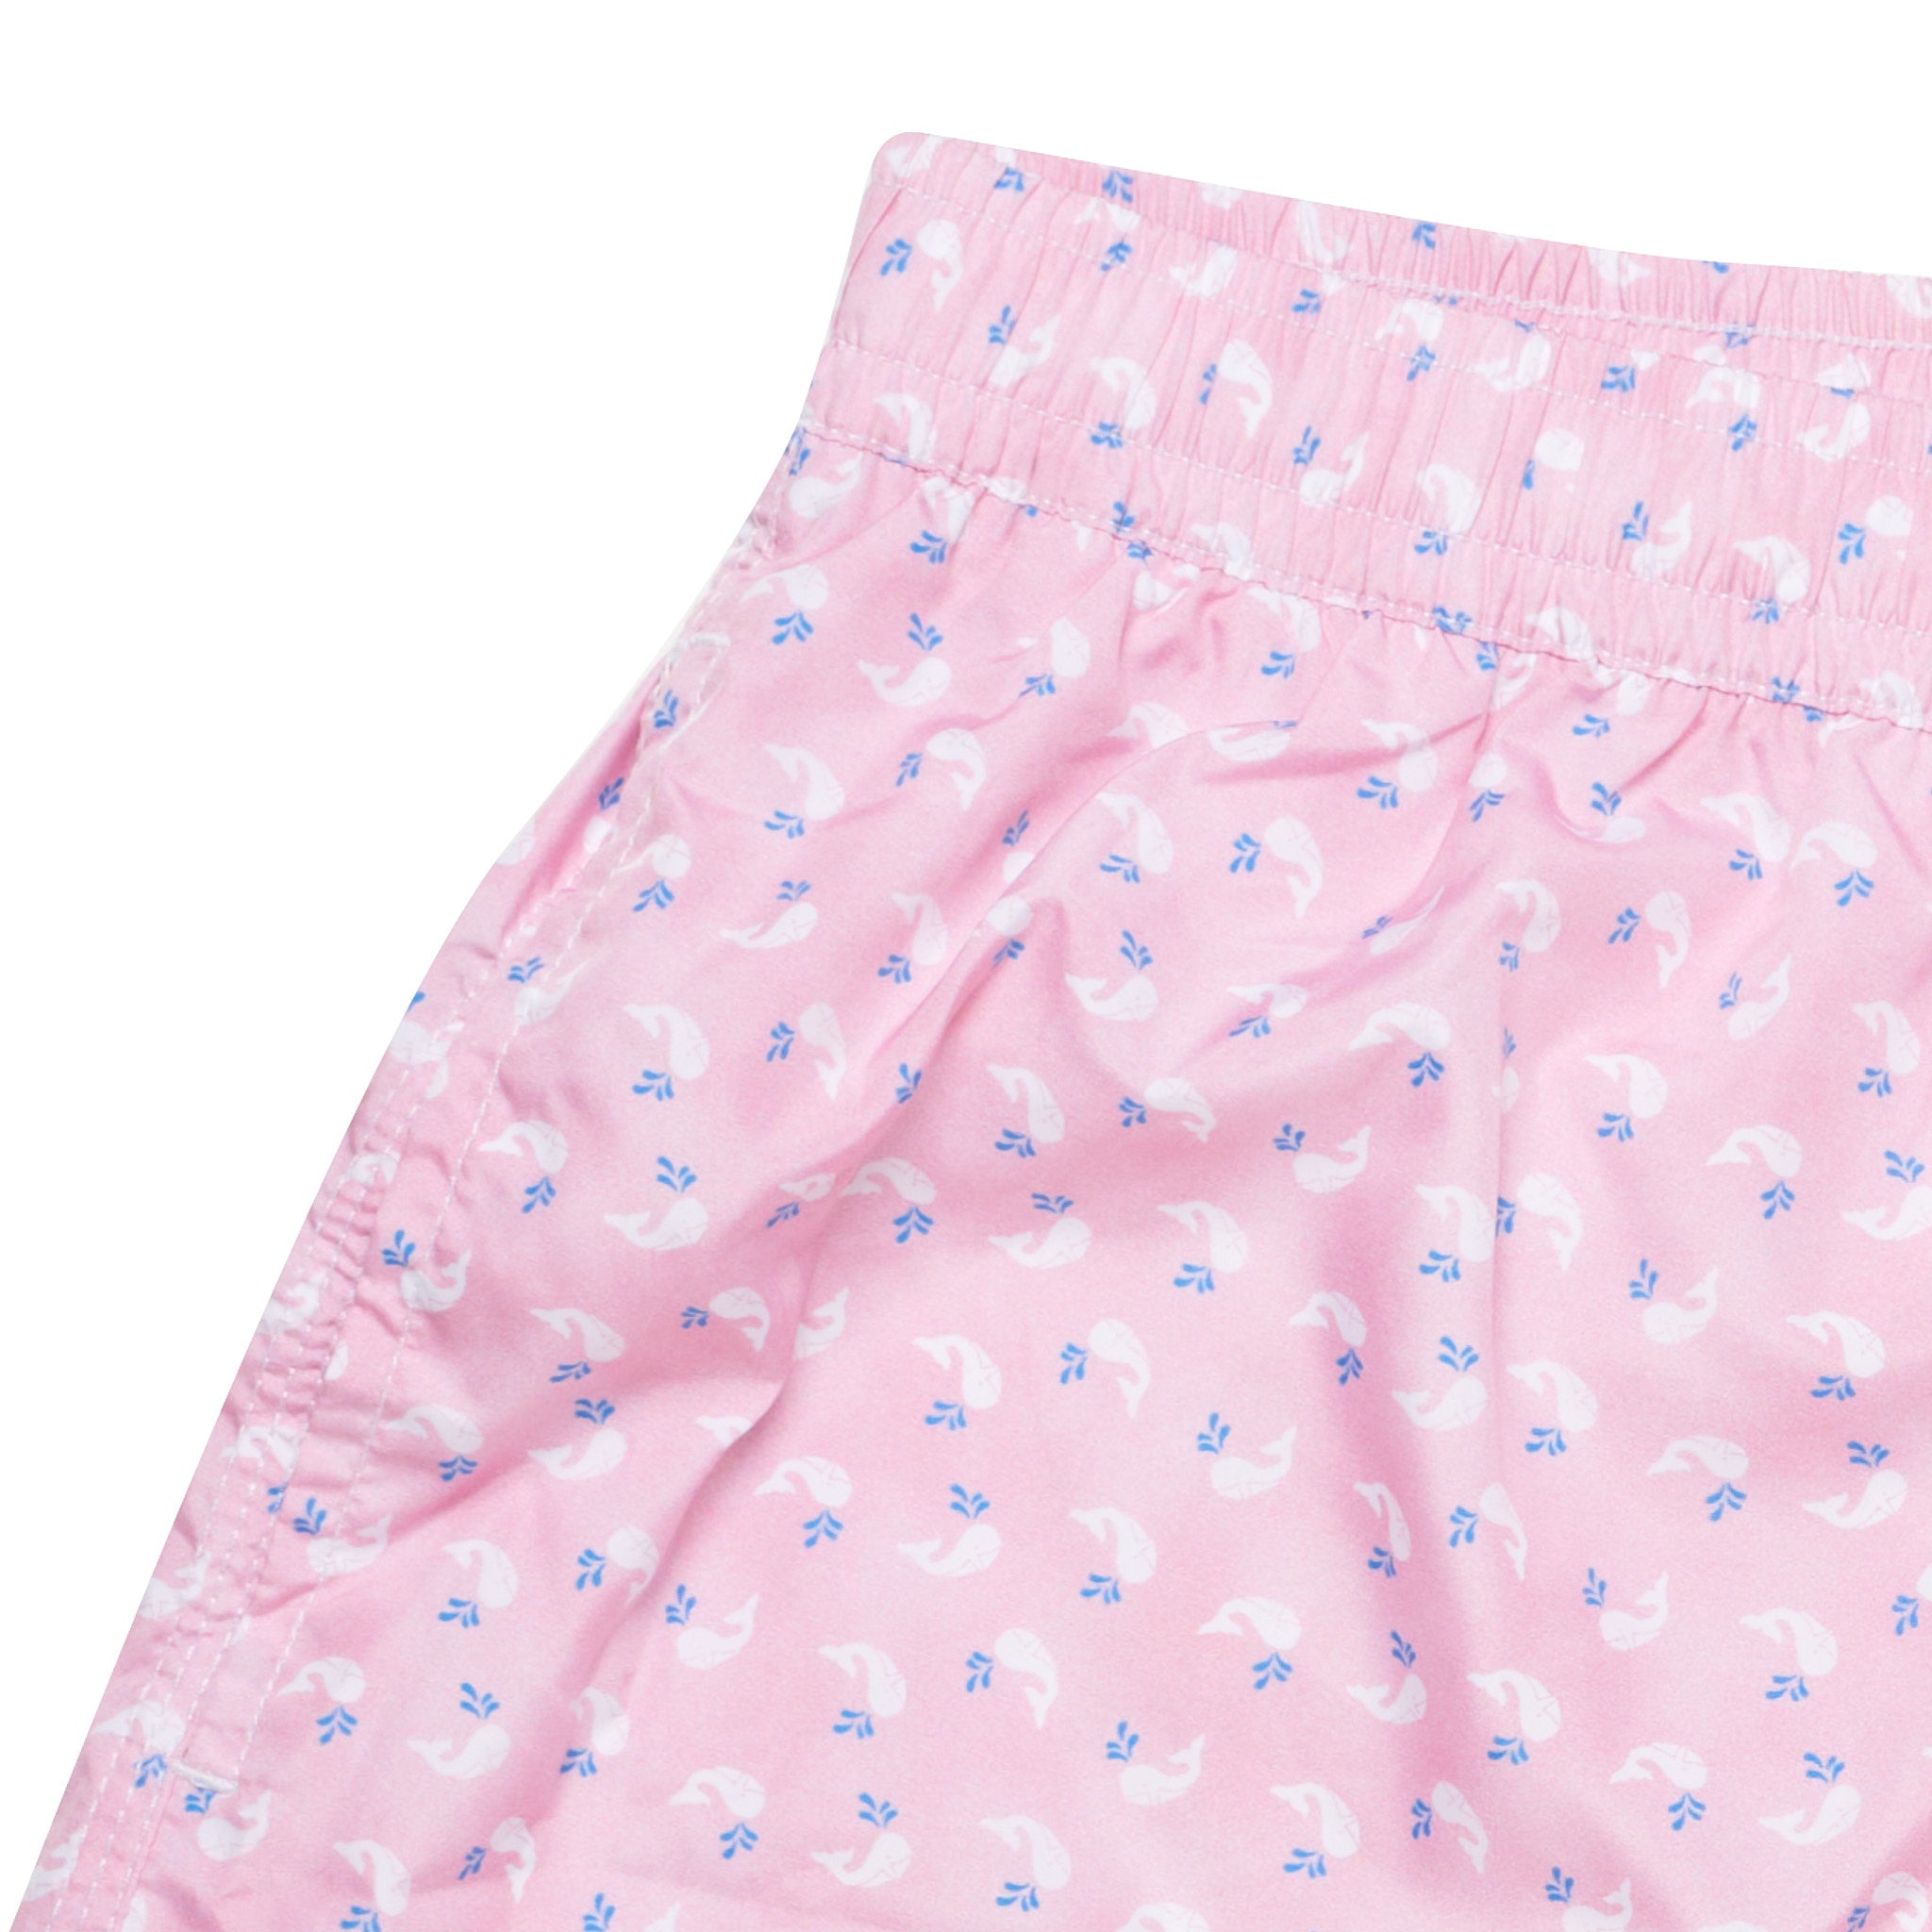 FEDELI Pink Whale Printed Madeira Airstop Swim Shorts Trunks NEW Size 3XL FEDELI